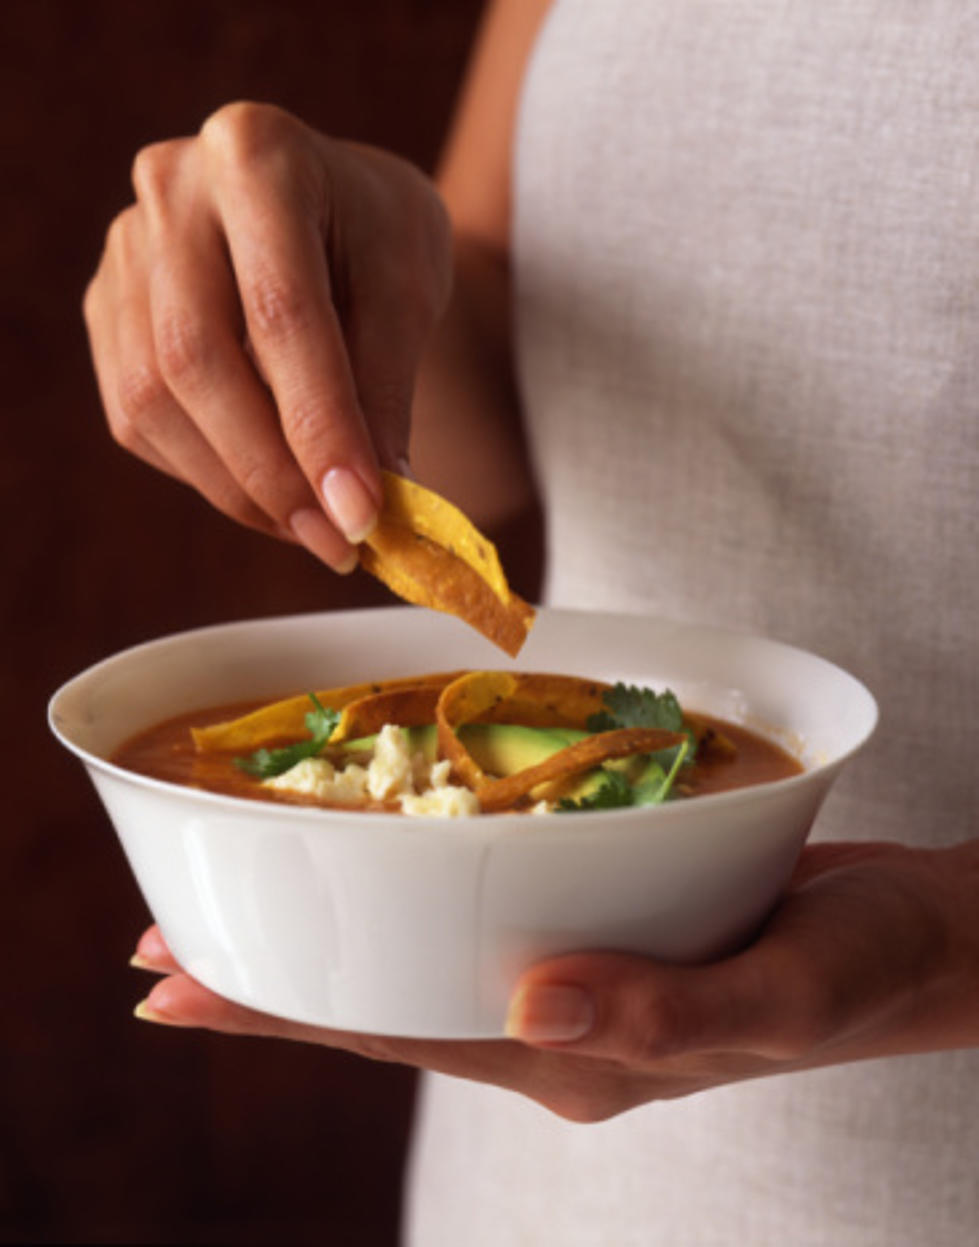 Baby, It’s Cold Outside! Warm Up With This Yummy Tortilla Soup!